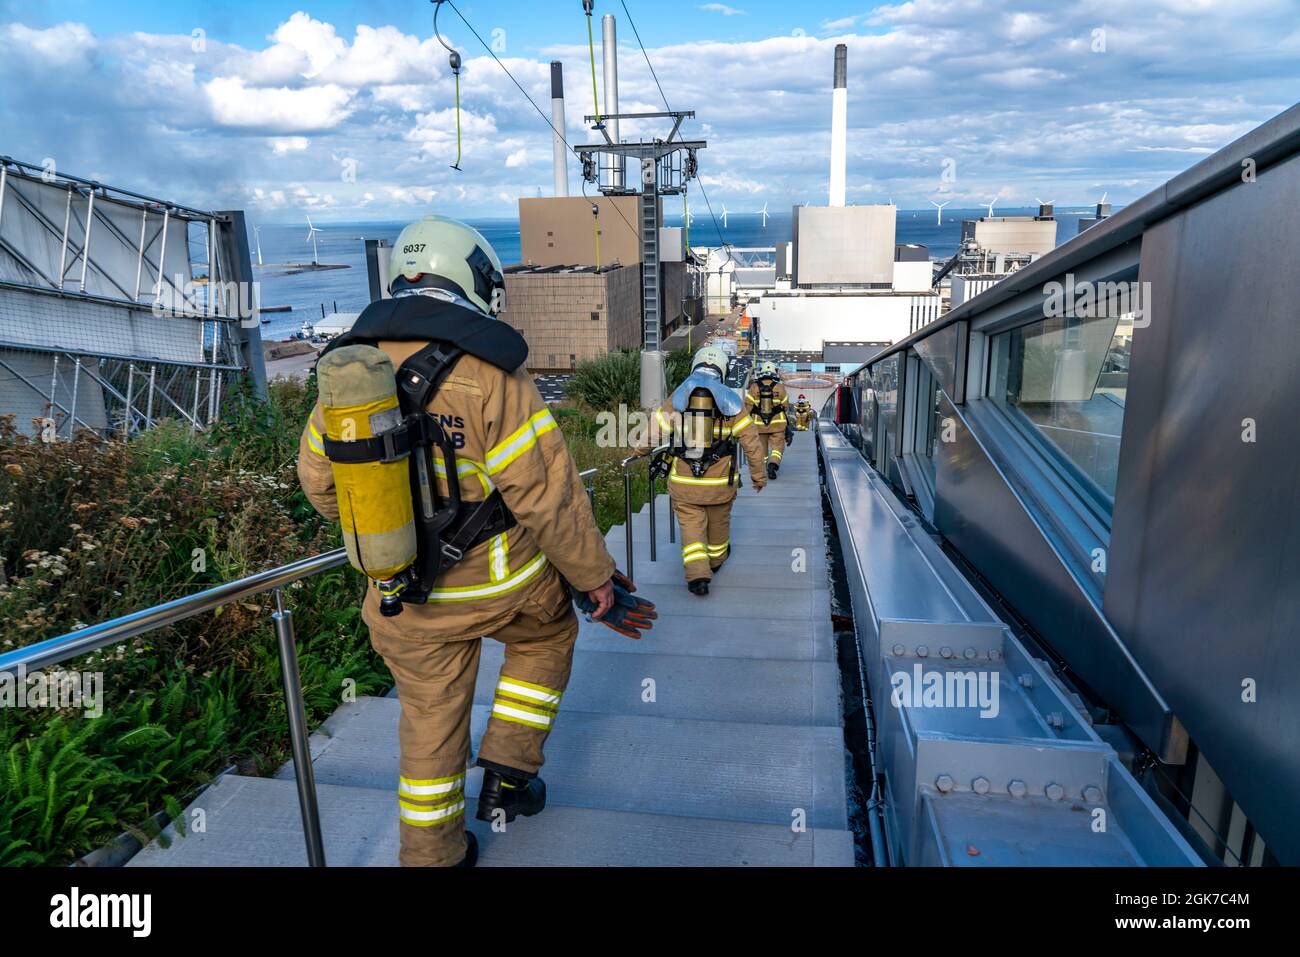 CopenHill, waste incinerator and artificial ski slope, firefighters do, under breathing protection, endurance training, skiing overlooking ski lift, 9 Stock Photo